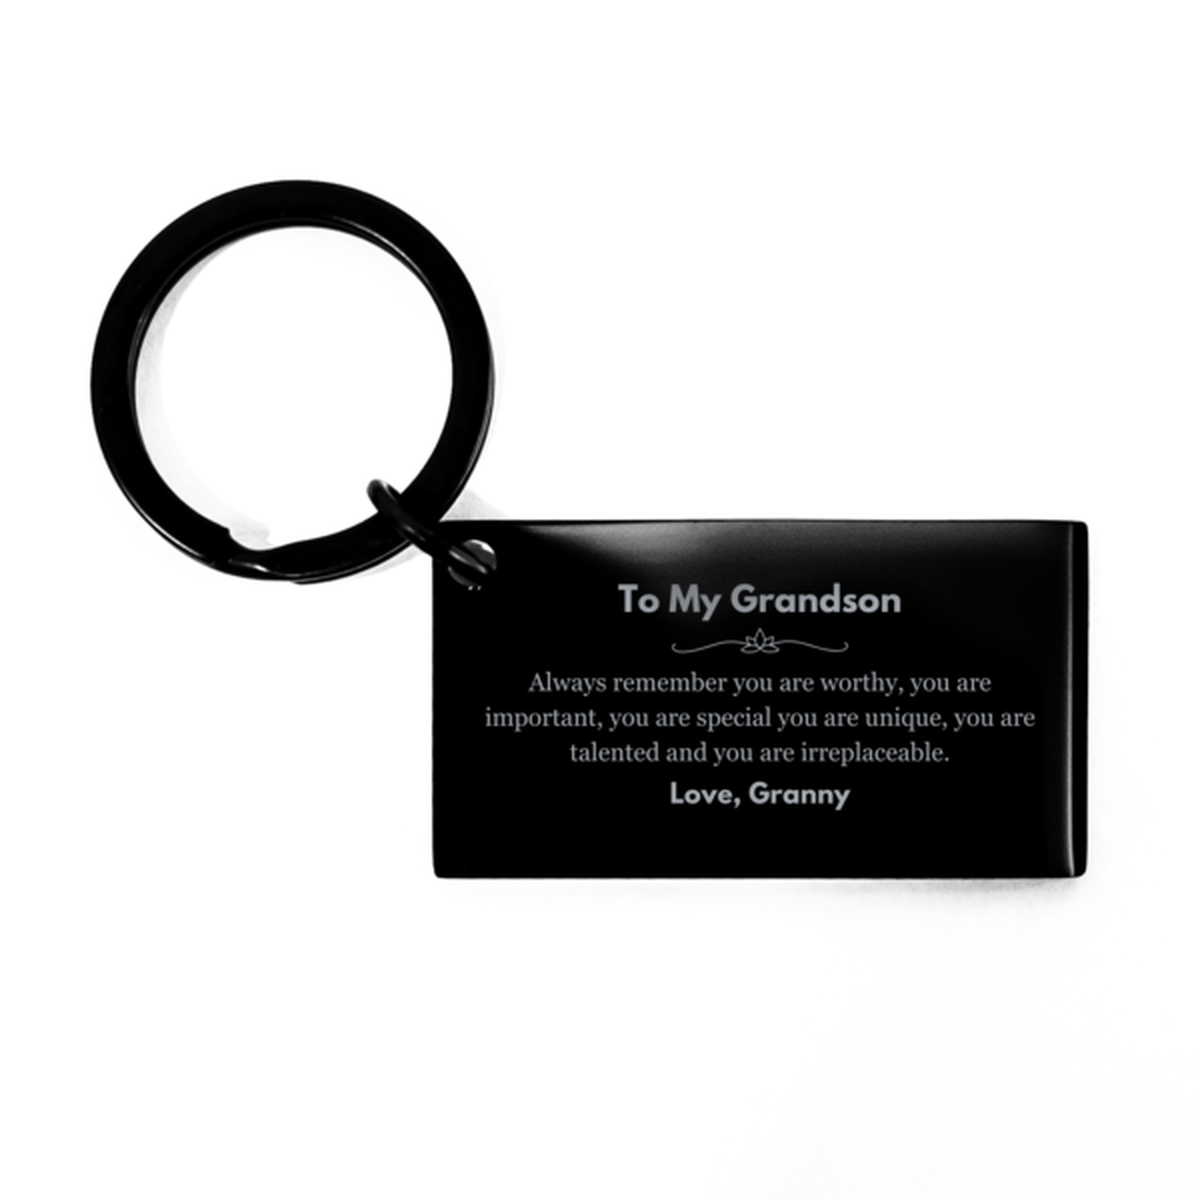 Grandson Birthday Gifts from Granny, Inspirational Keychain for Grandson Christmas Graduation Gifts for Grandson Always remember you are worthy, you are important. Love, Granny